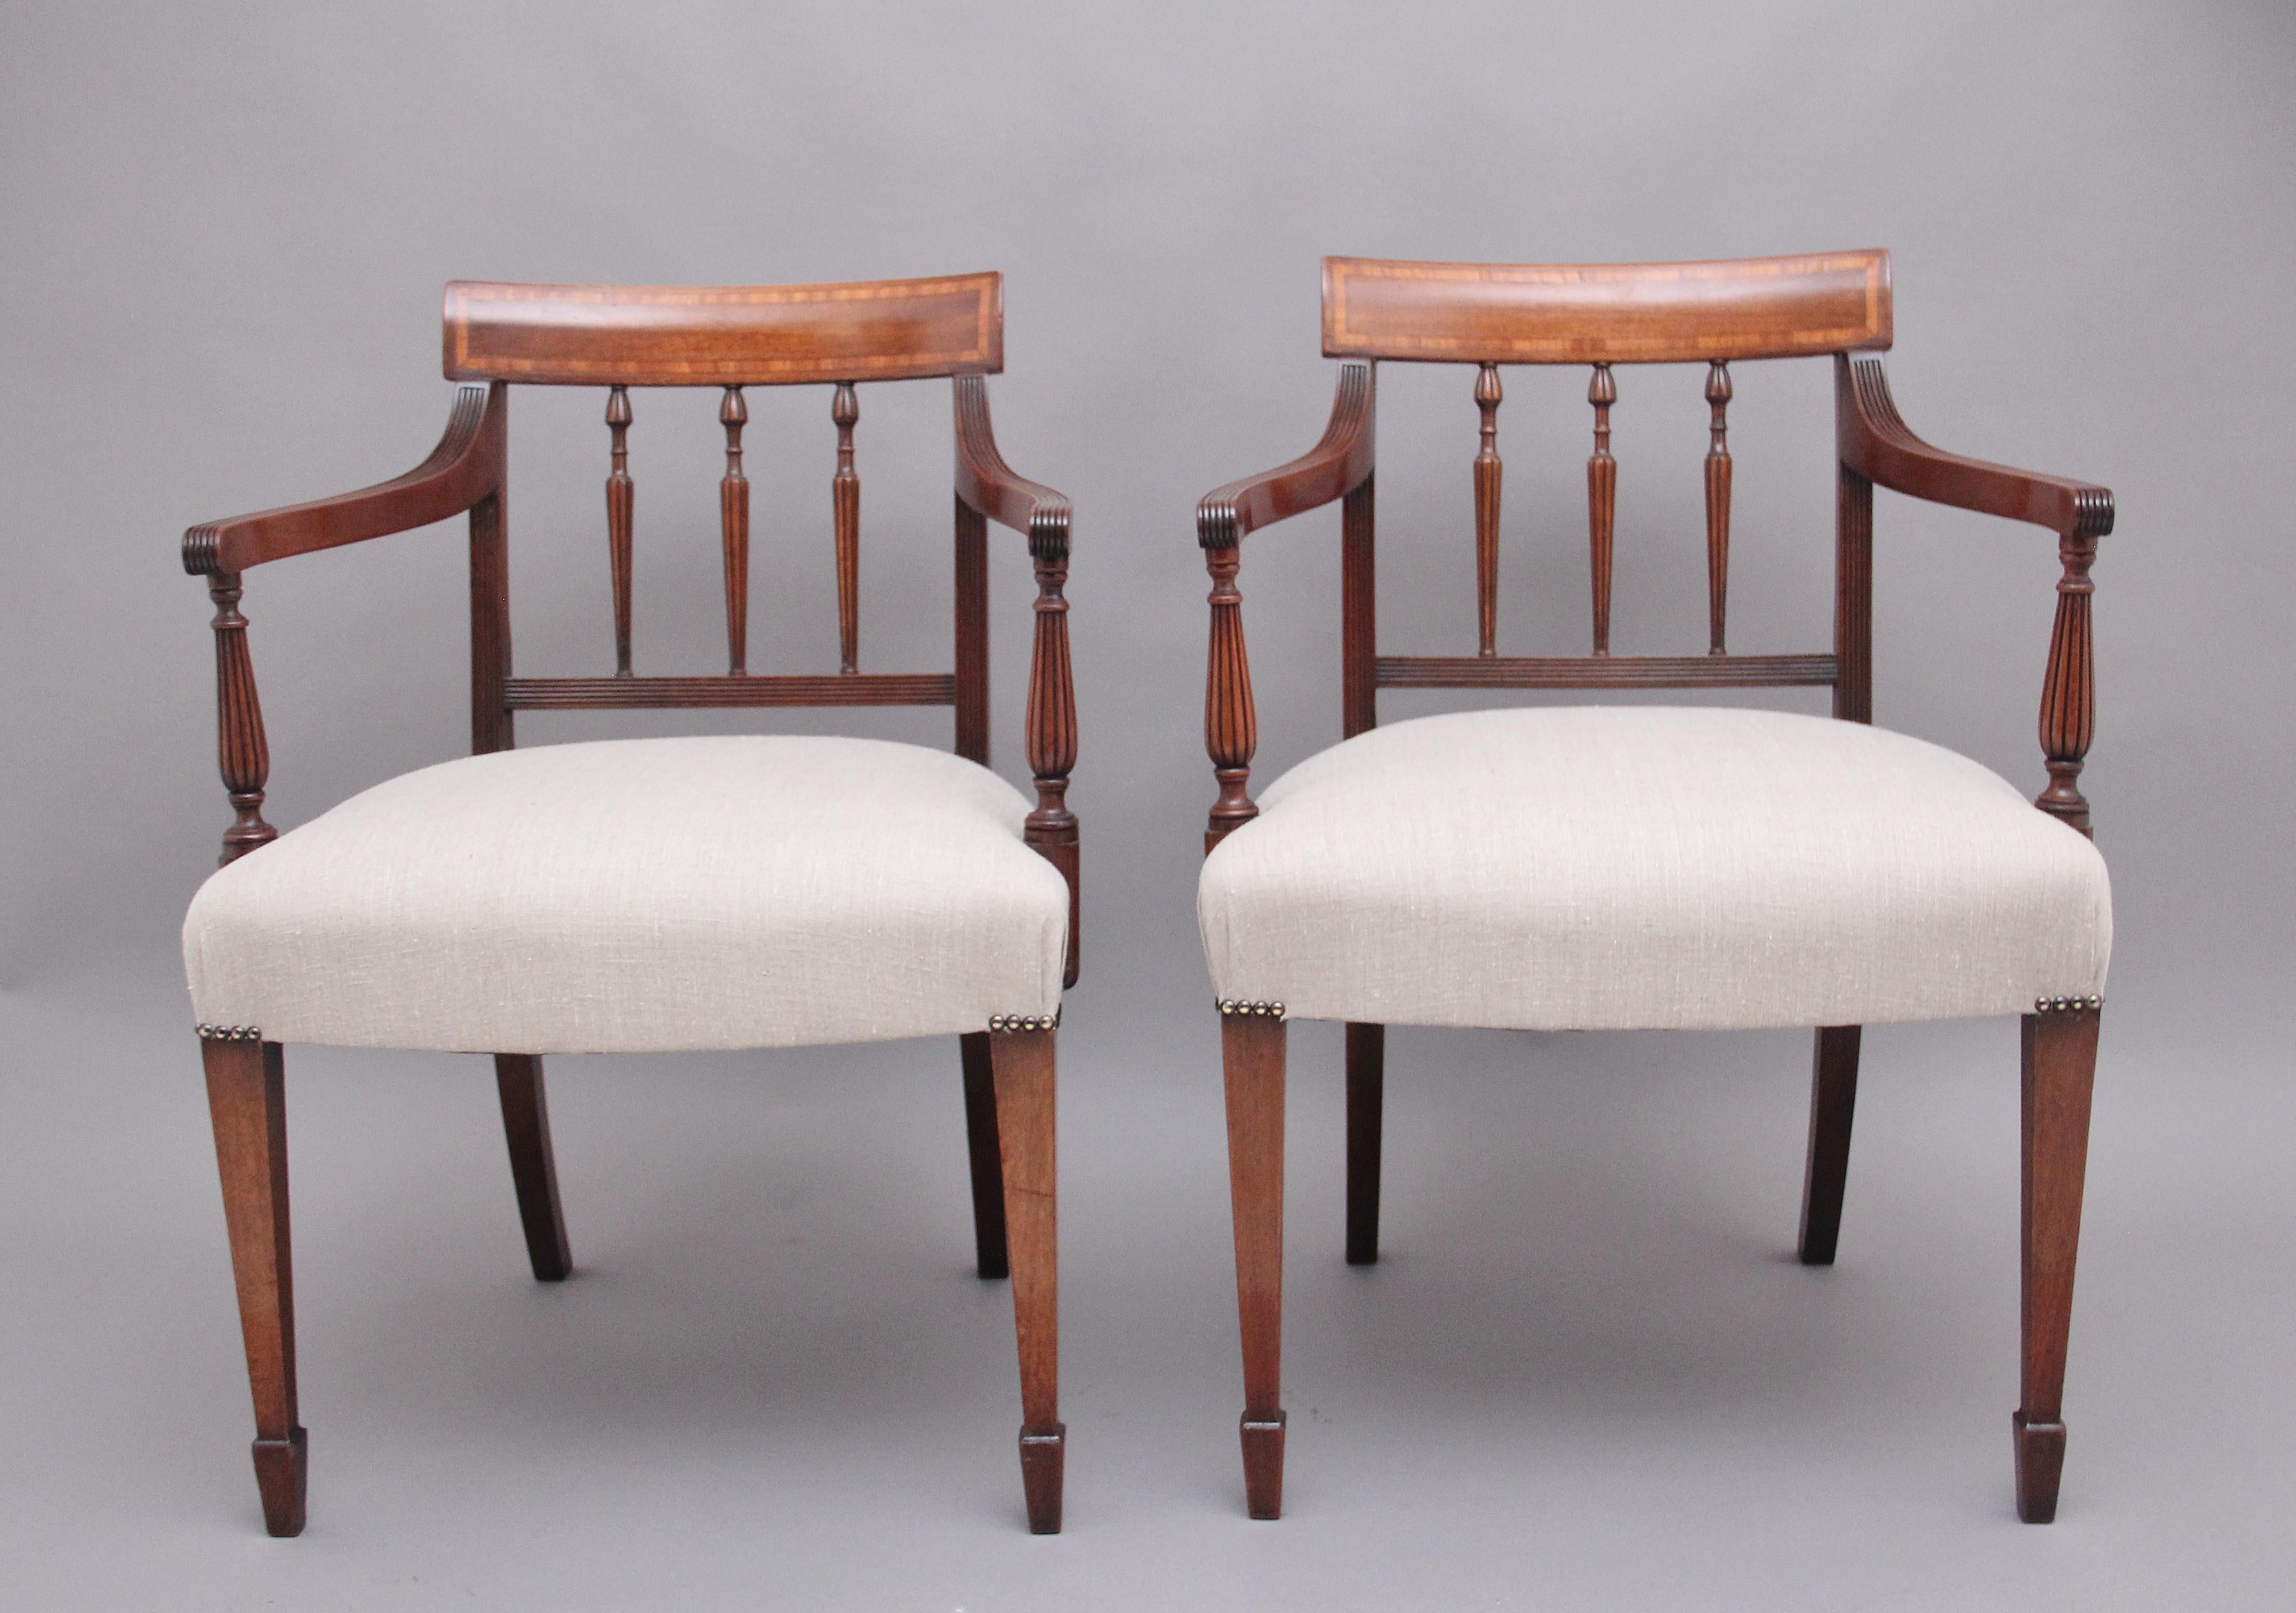 A pair of 19th century mahogany armchairs, having a shaped and inlaid top rail above three finely turned spindles, having wonderfully shaped and reeded arms with decorative turned supports, recently been reupholstered in a grey stuffover seat,